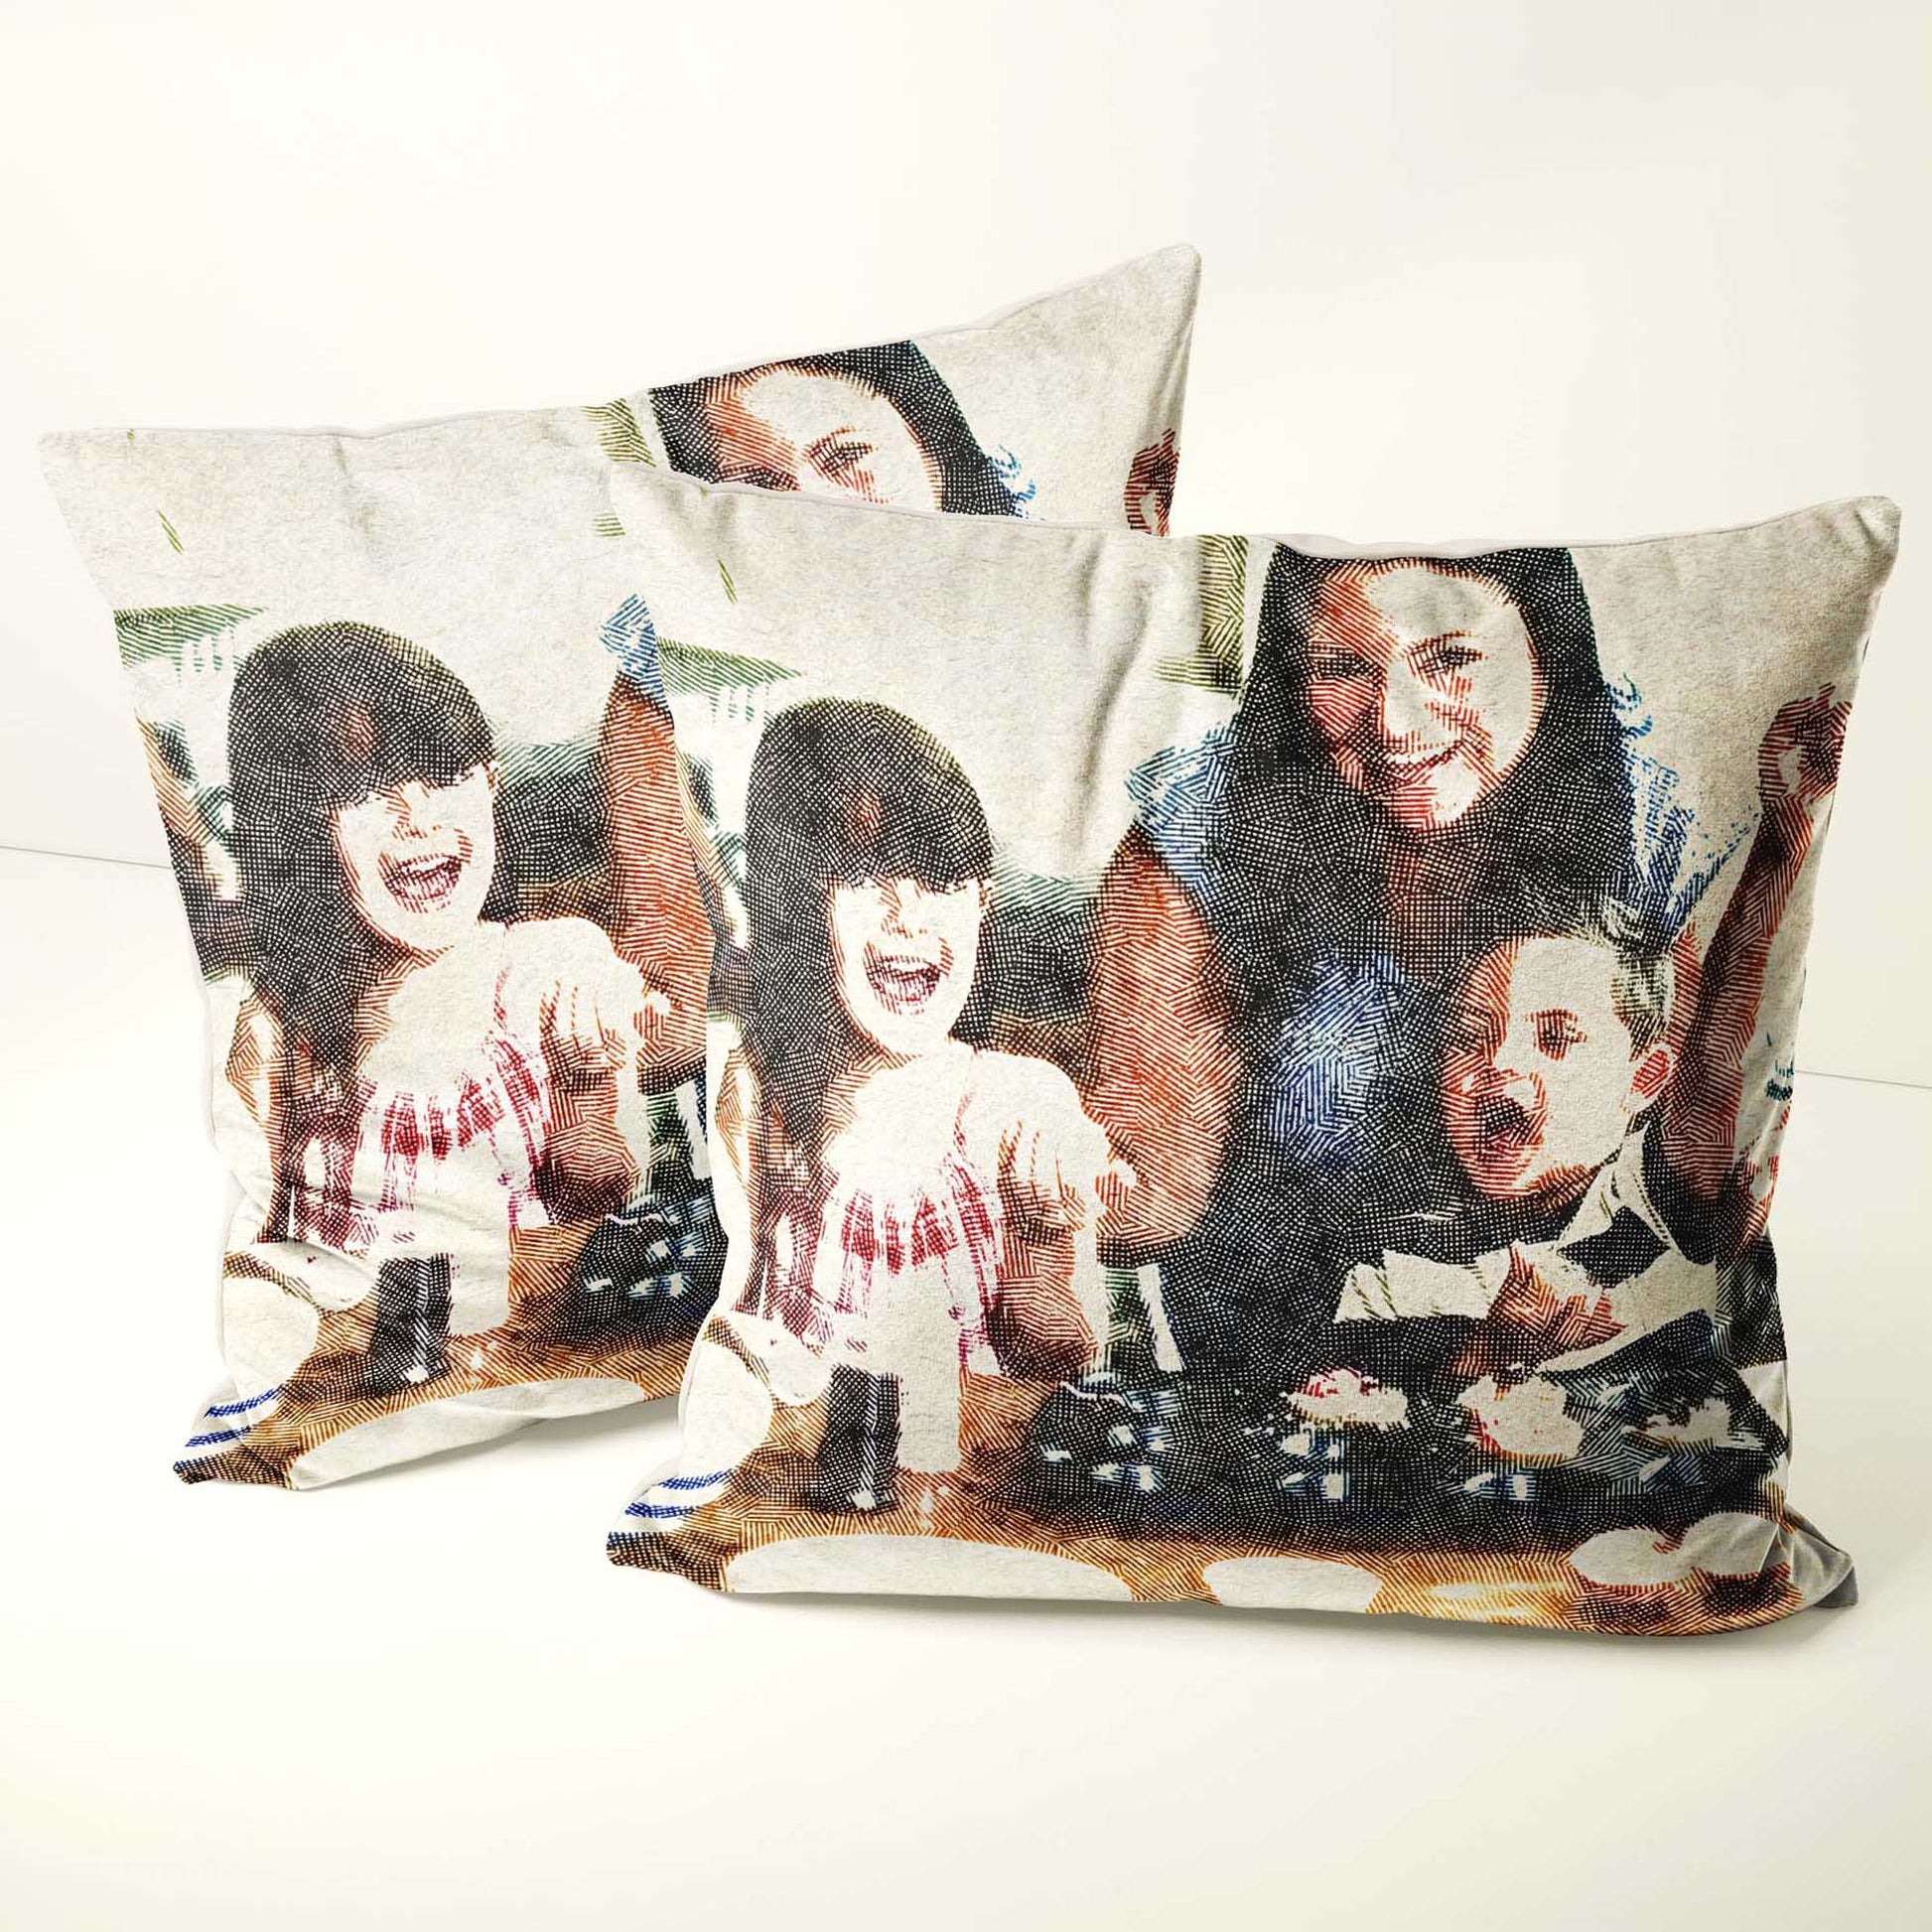 Experience the perfect blend of art and comfort with the Personalised Crosshatch Cushion. By transforming your photo into a stunning painting, it showcases a natural texture that exudes uniqueness and originality